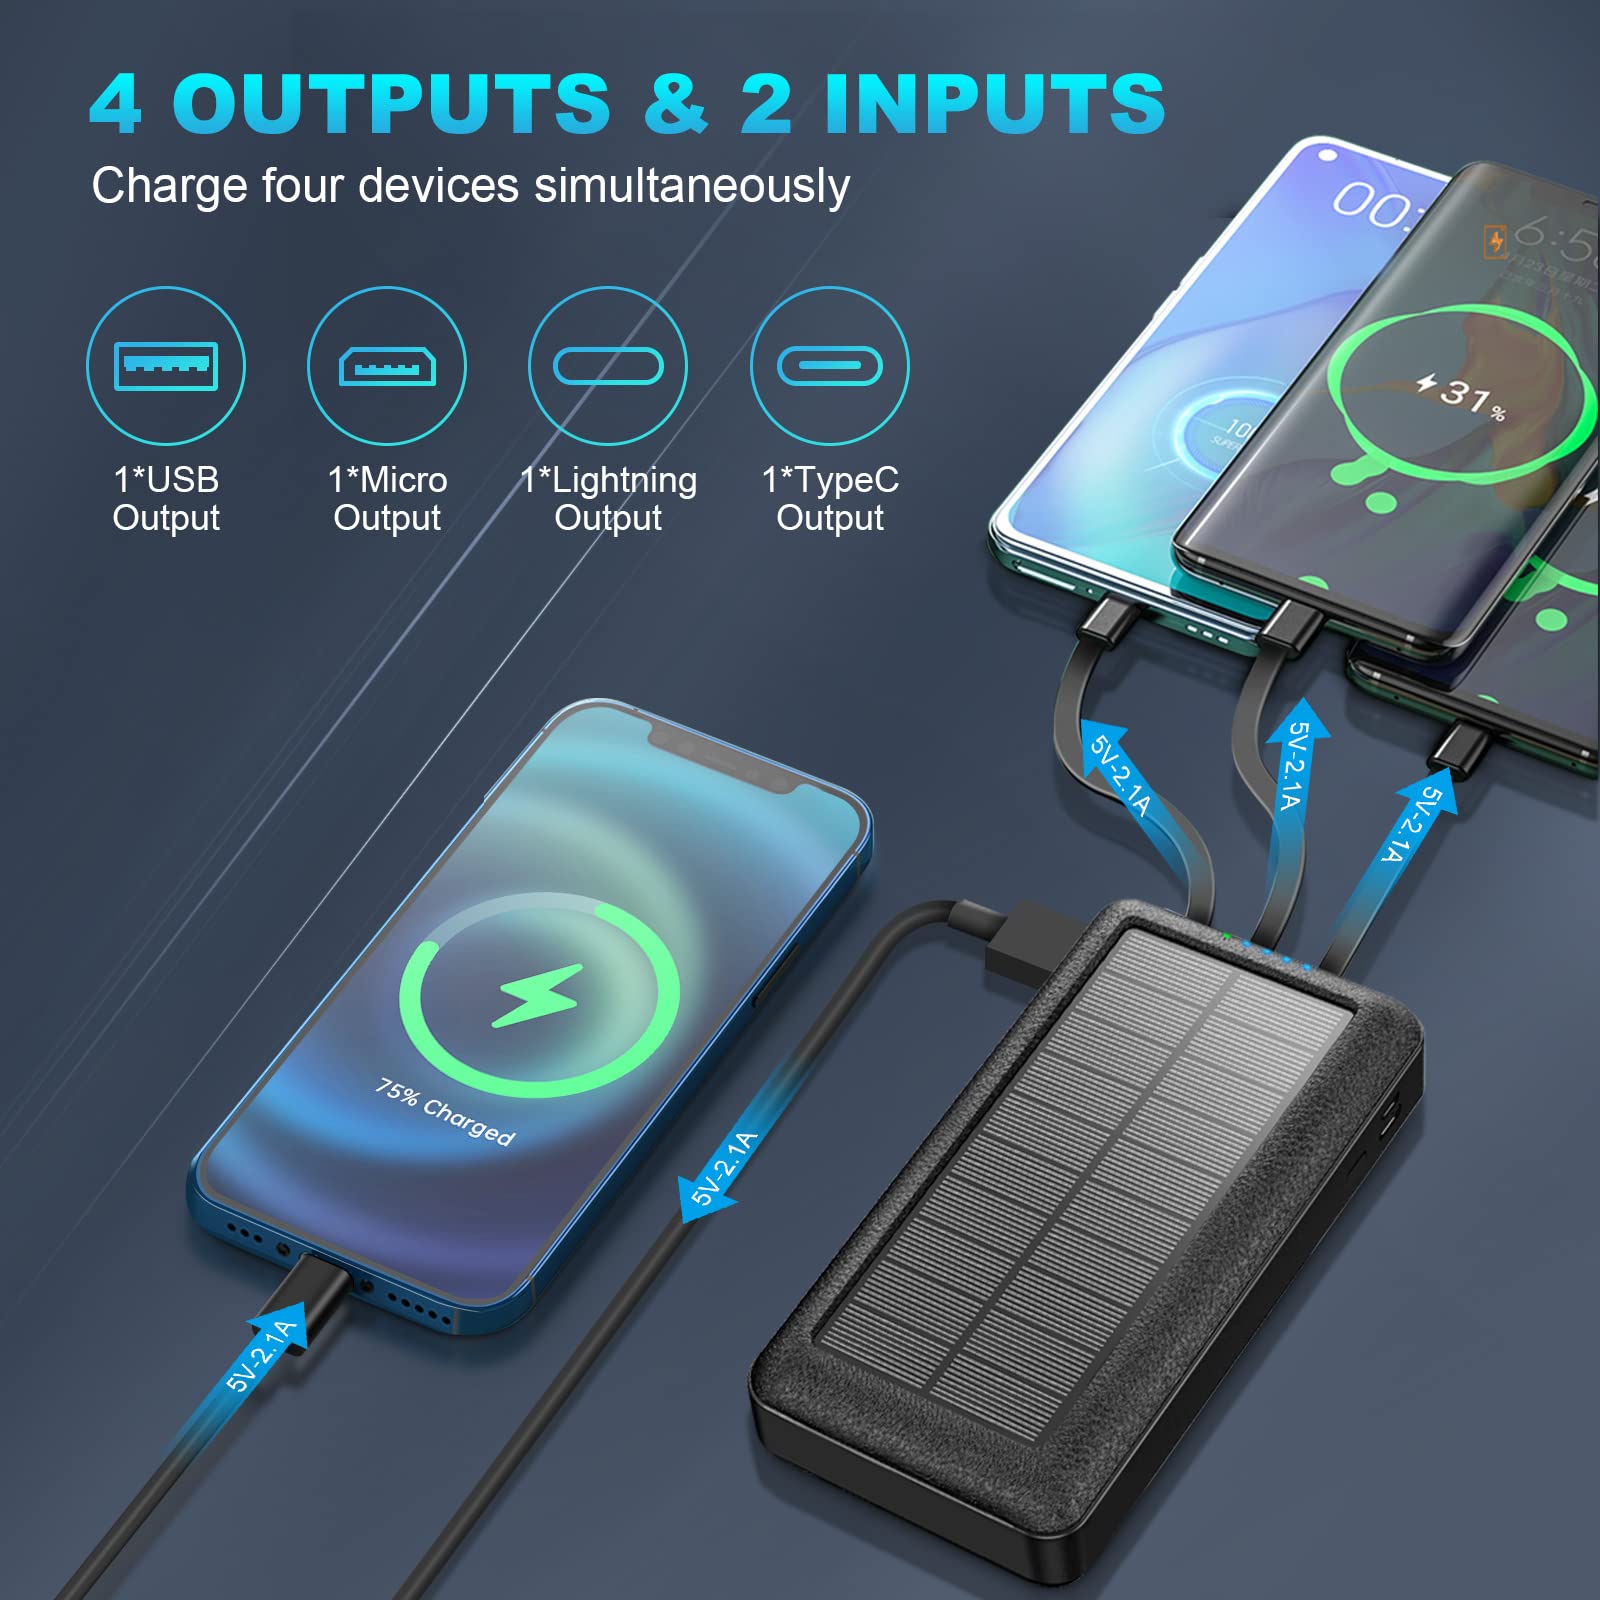 Portable Charger with Built-in Cables 30000mAh Solar Power Bank Fast Charge Battery Pack with 4 Outputs 3 Inputs,LED Flashlights,Solar Phone Charger for Smart Phones,Tablets and Camping